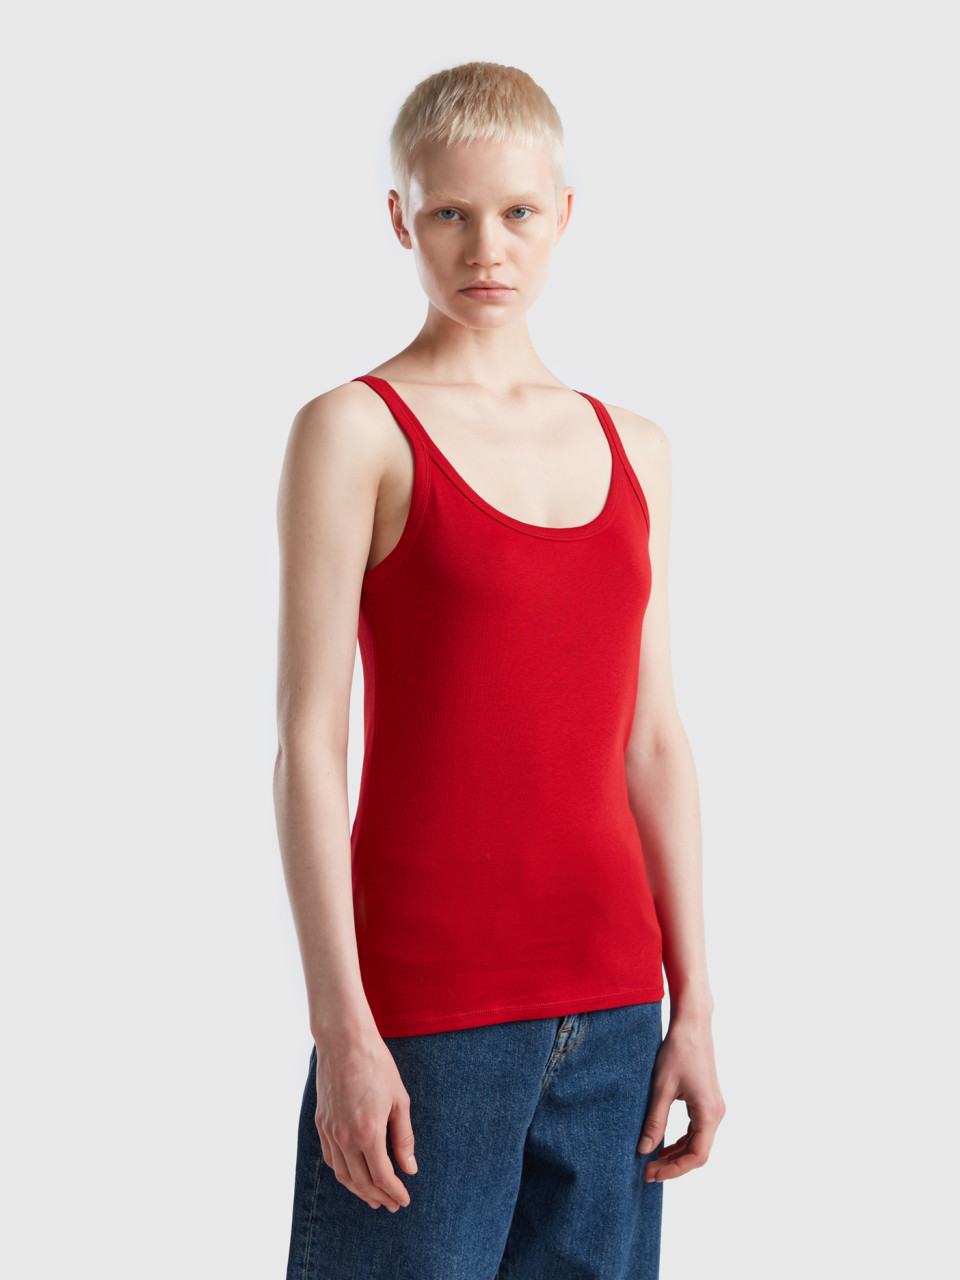 Benetton, Ribbed Tank Top, Red, Women